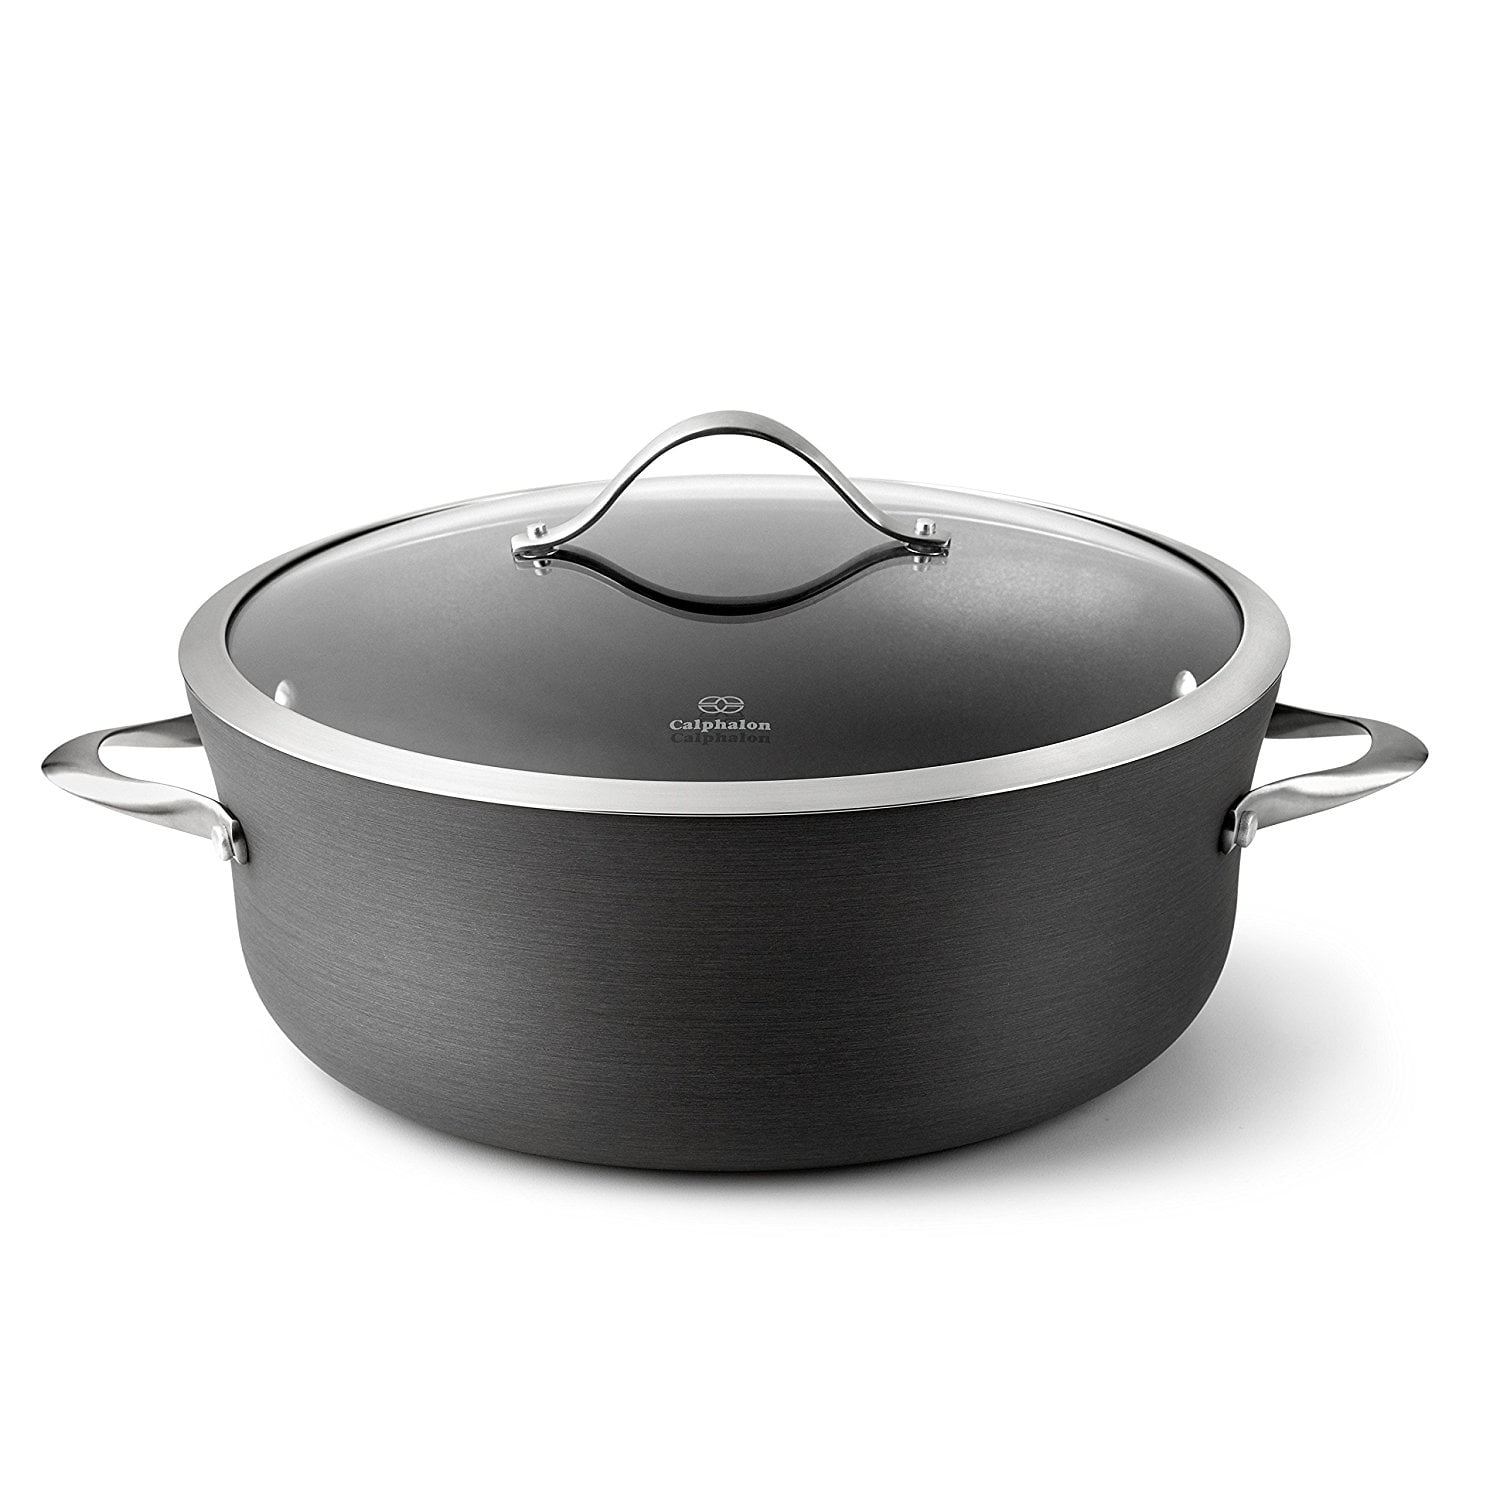 NEW Calphalon Simply Easy Nonstick Covered 5QT Dutch Oven 